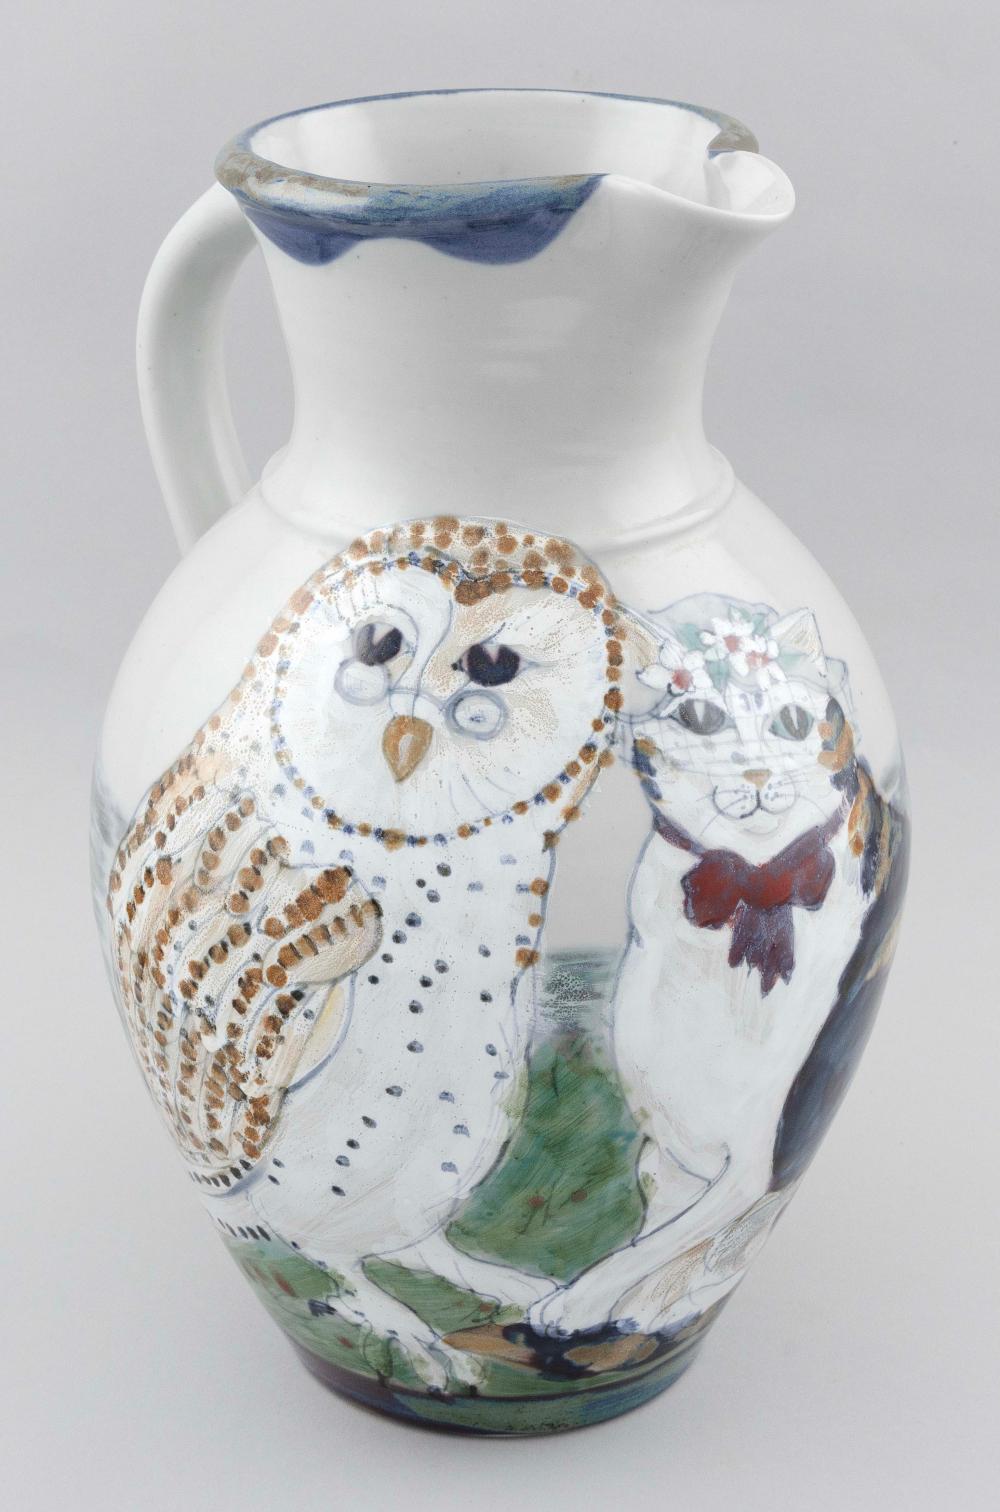 CERAMIC PITCHER DEPICTING AN OWL AND